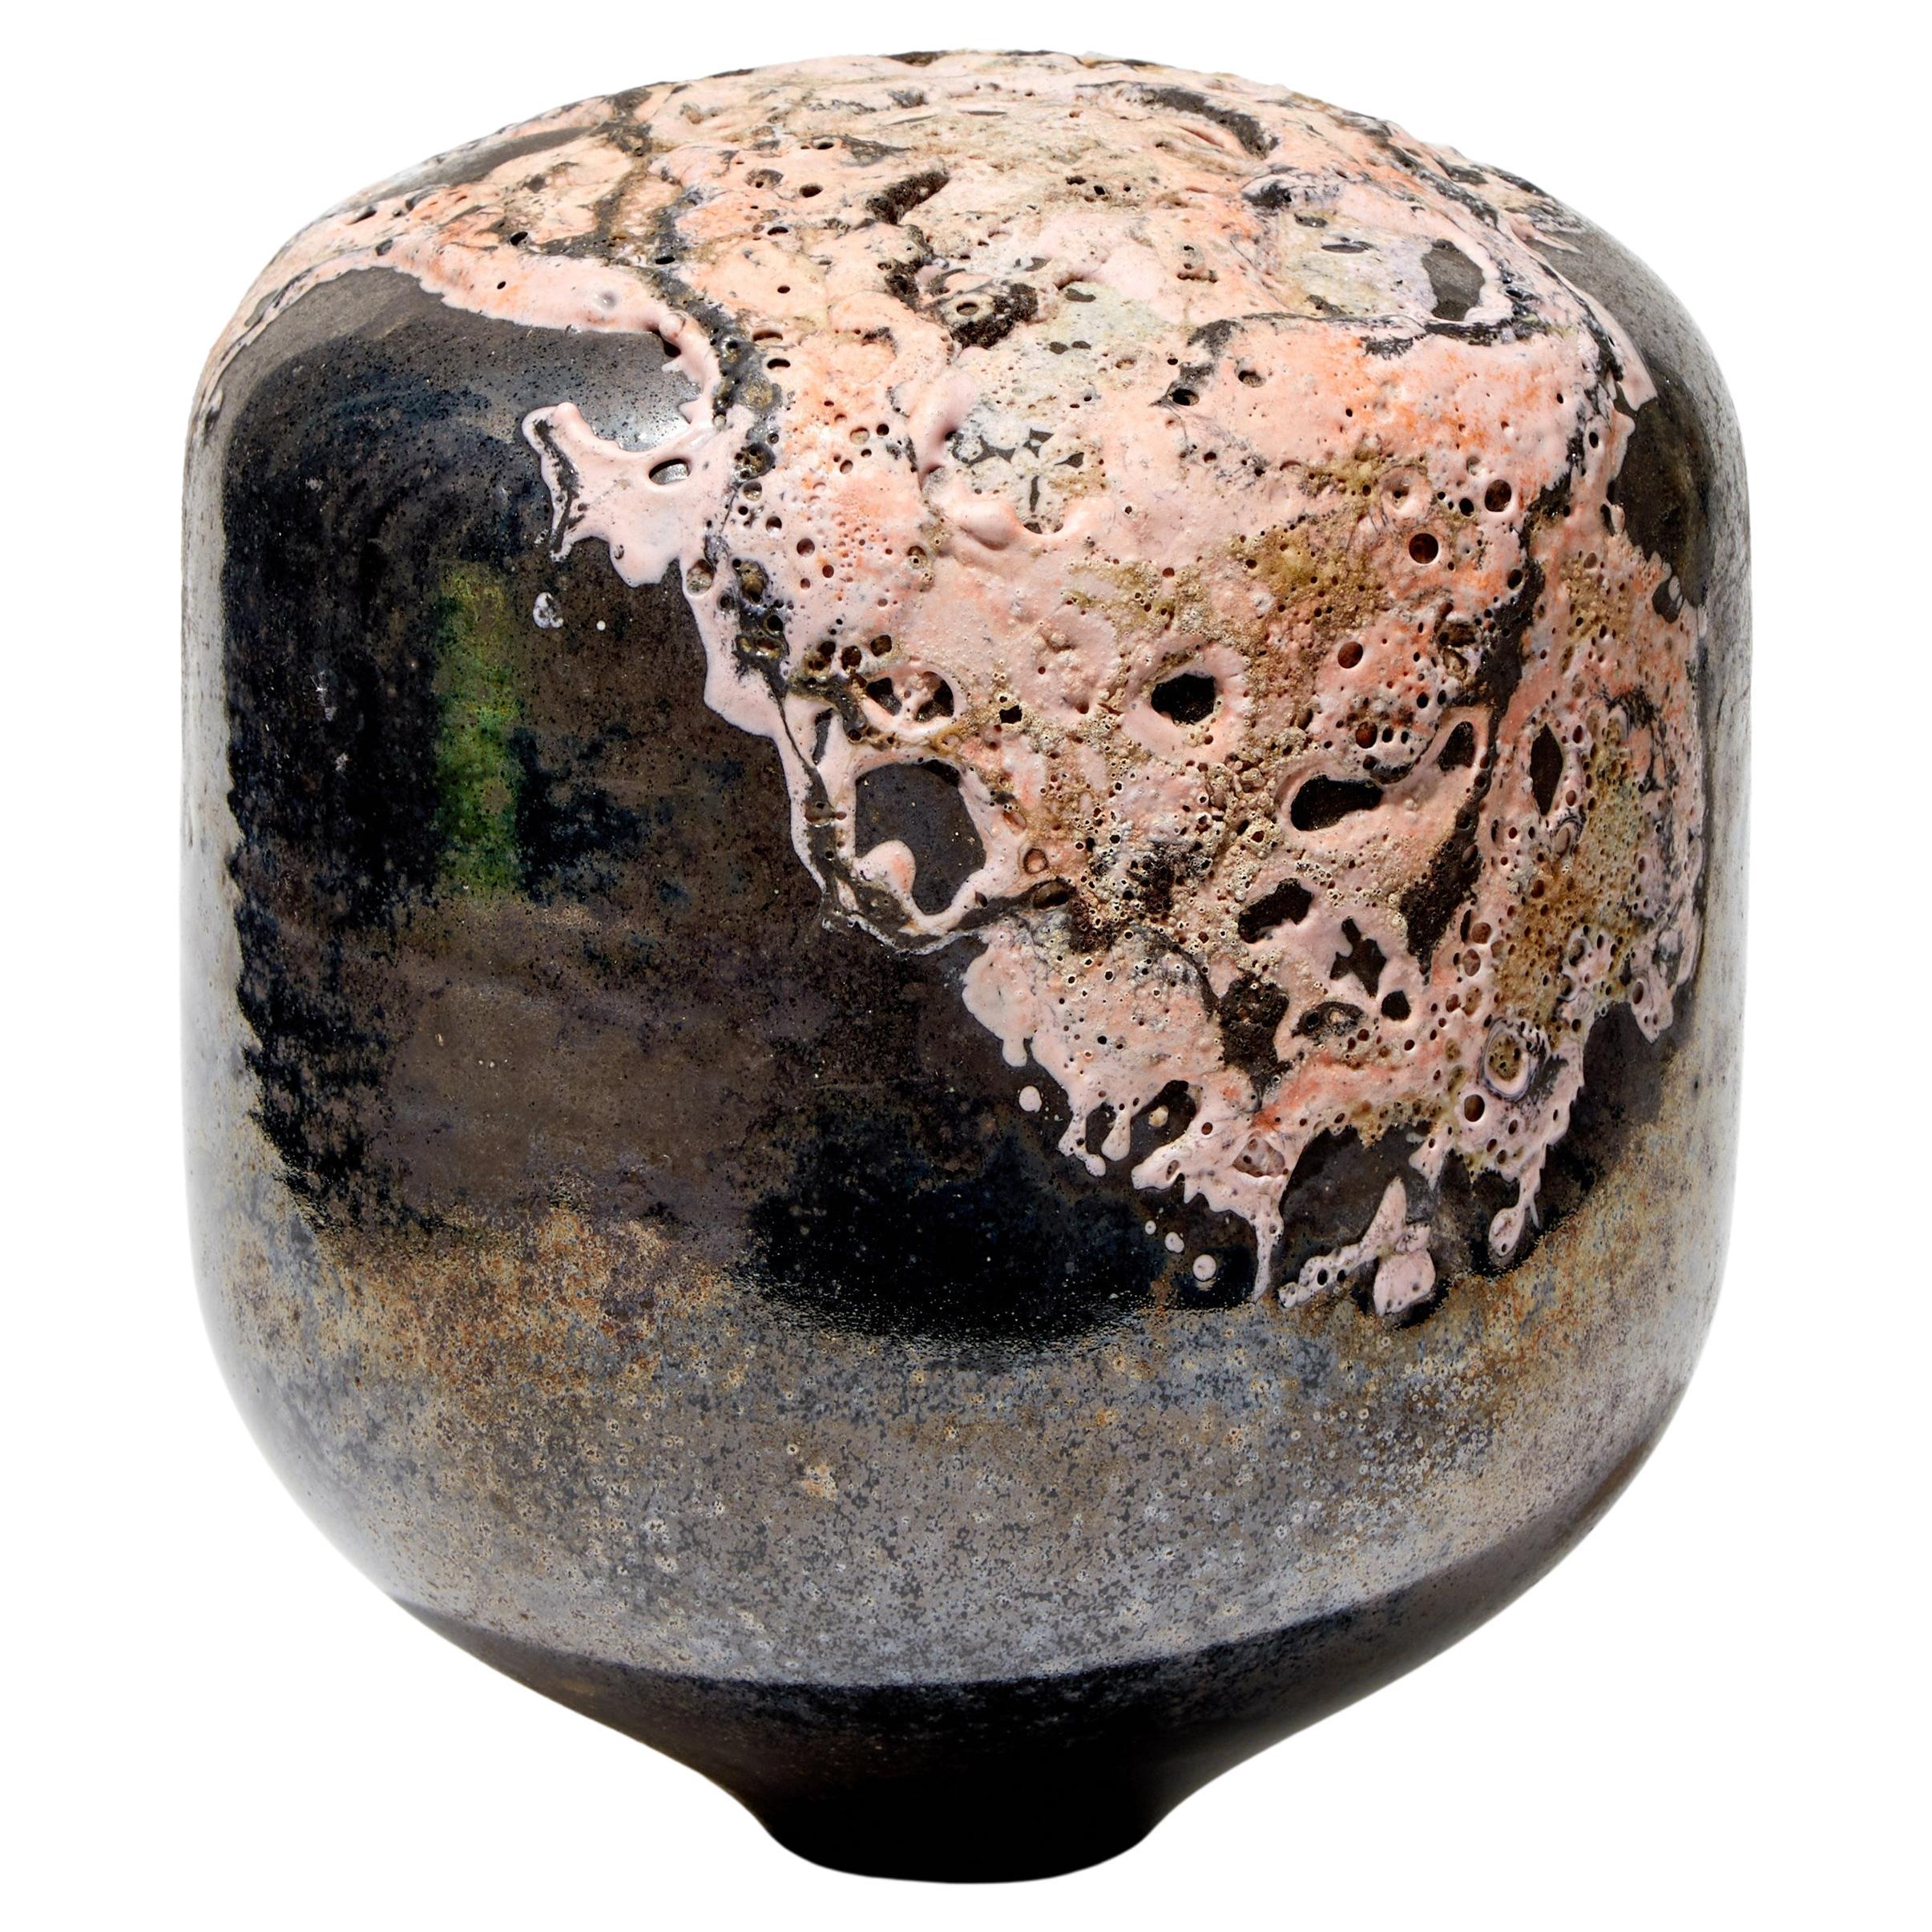  Oro in Pink I, a Black & Soft Pink Abstract Glass Sculpture by Morten Klitgaard For Sale